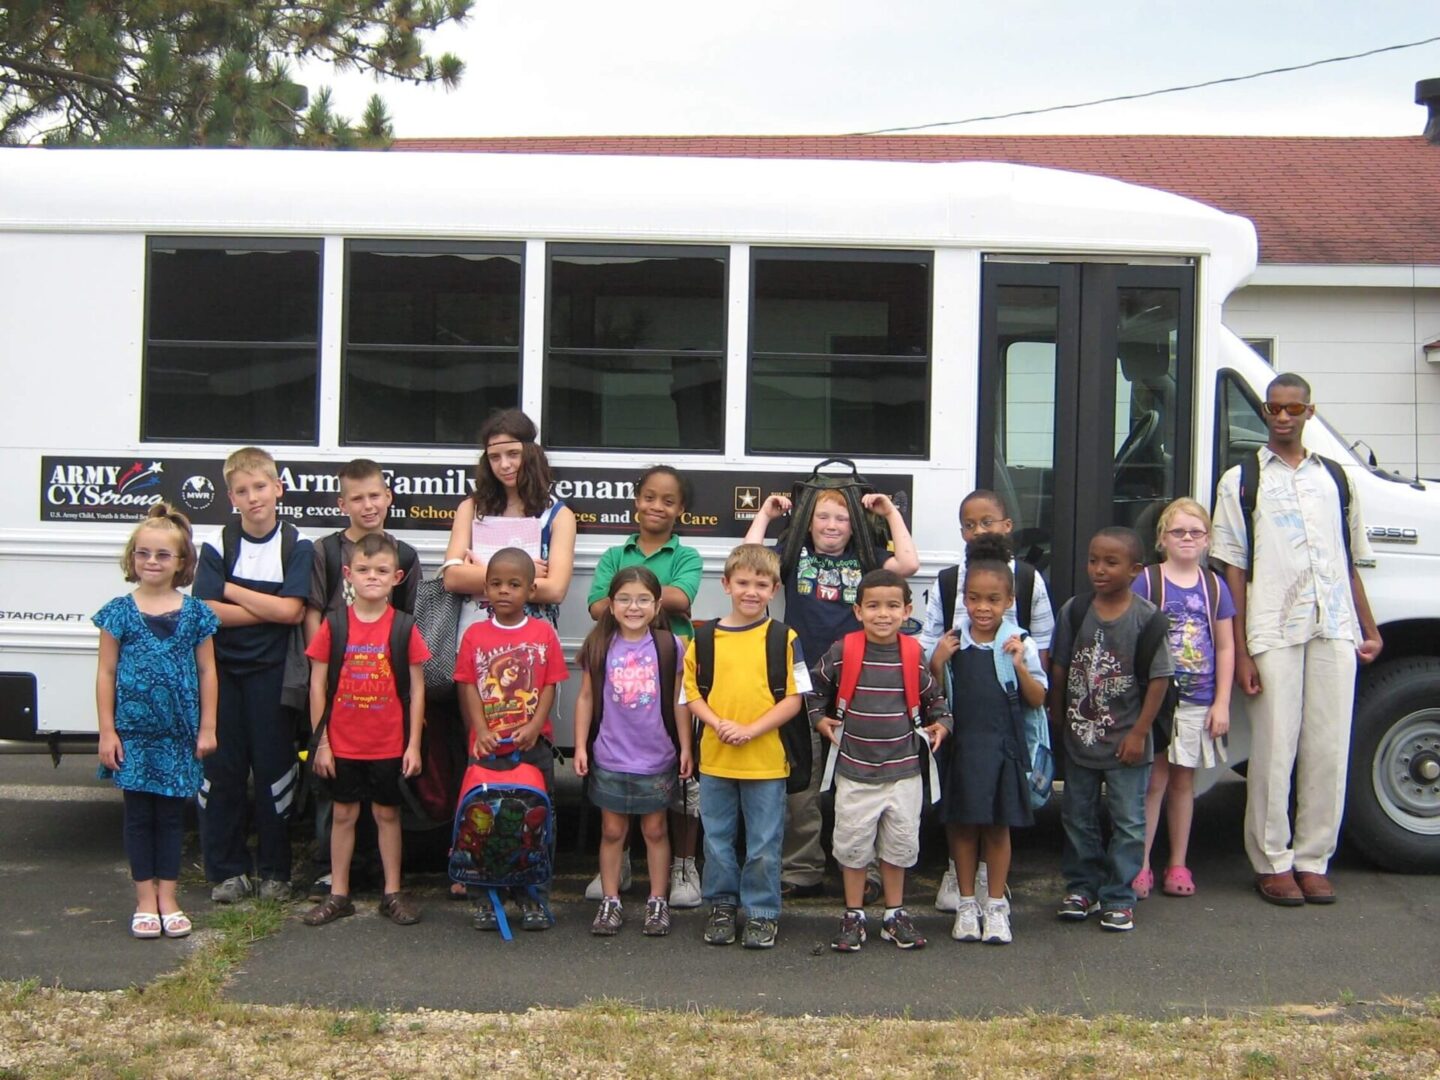 A bunch of kids standing near a bus and packed and ready to go